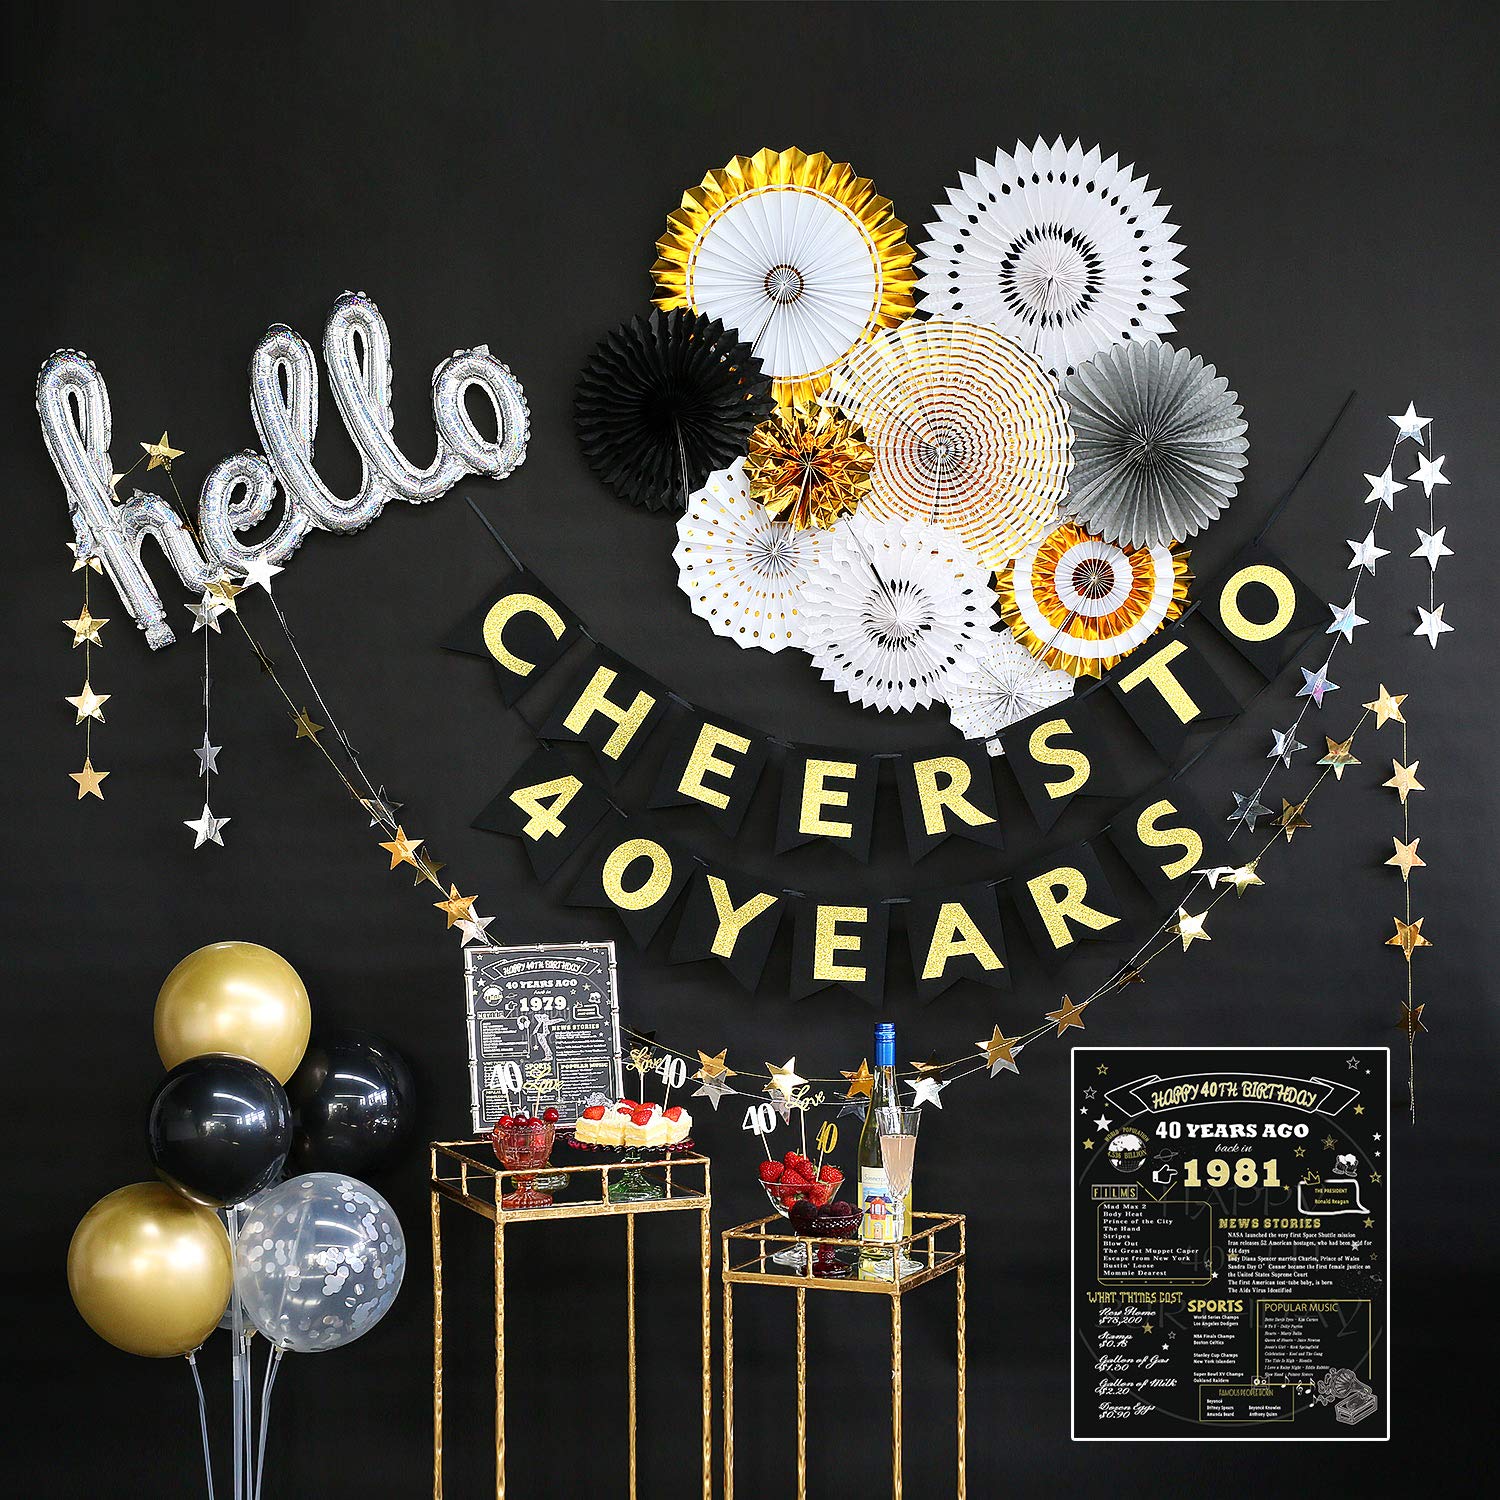 Top 10 40th birthday decoration ideas for her to throw a stylish party